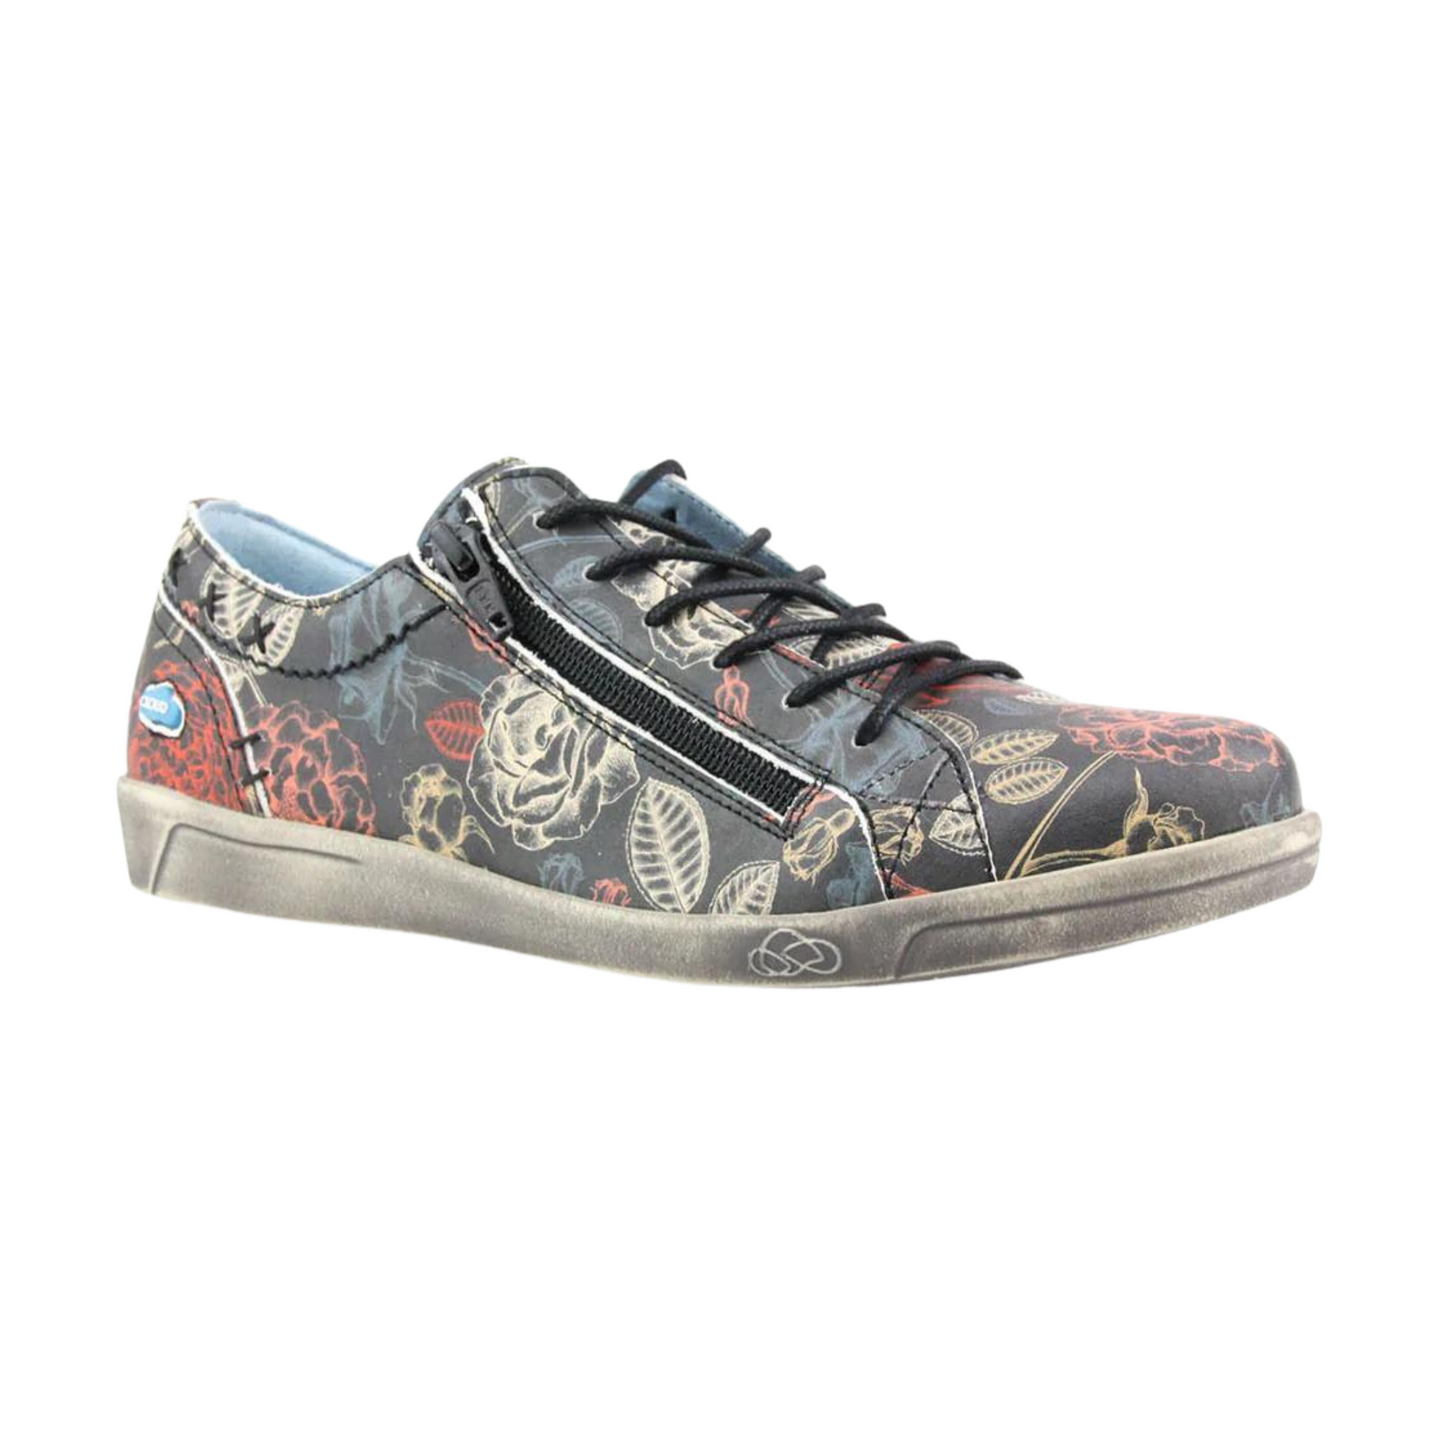 A right side view of a colourful floral-patterned sneaker.